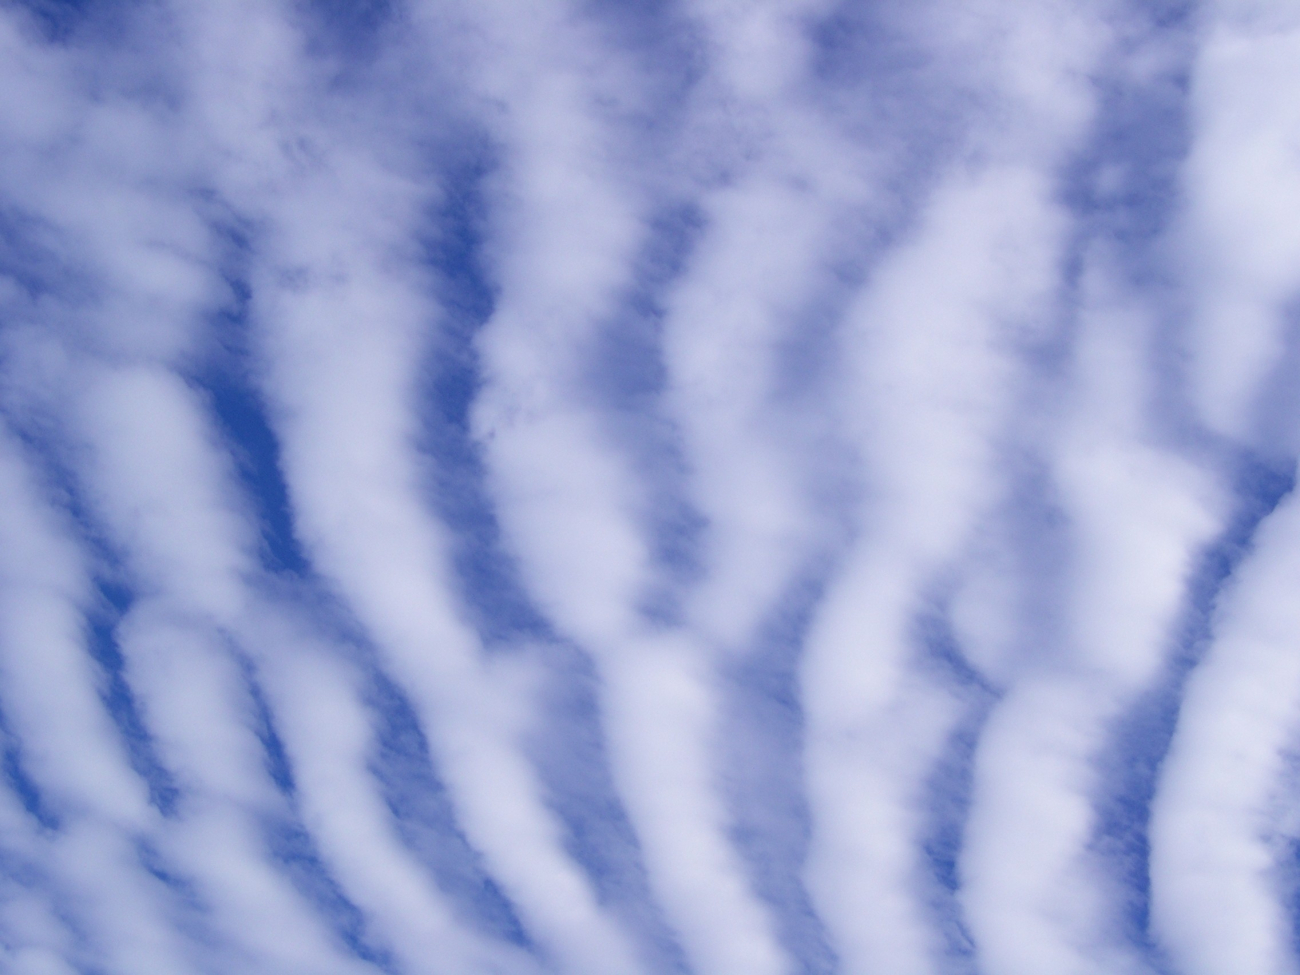 These unusual wave clouds were photographed from the Saddle Road a fewmiles from the road to the Mauna Loa Observatory